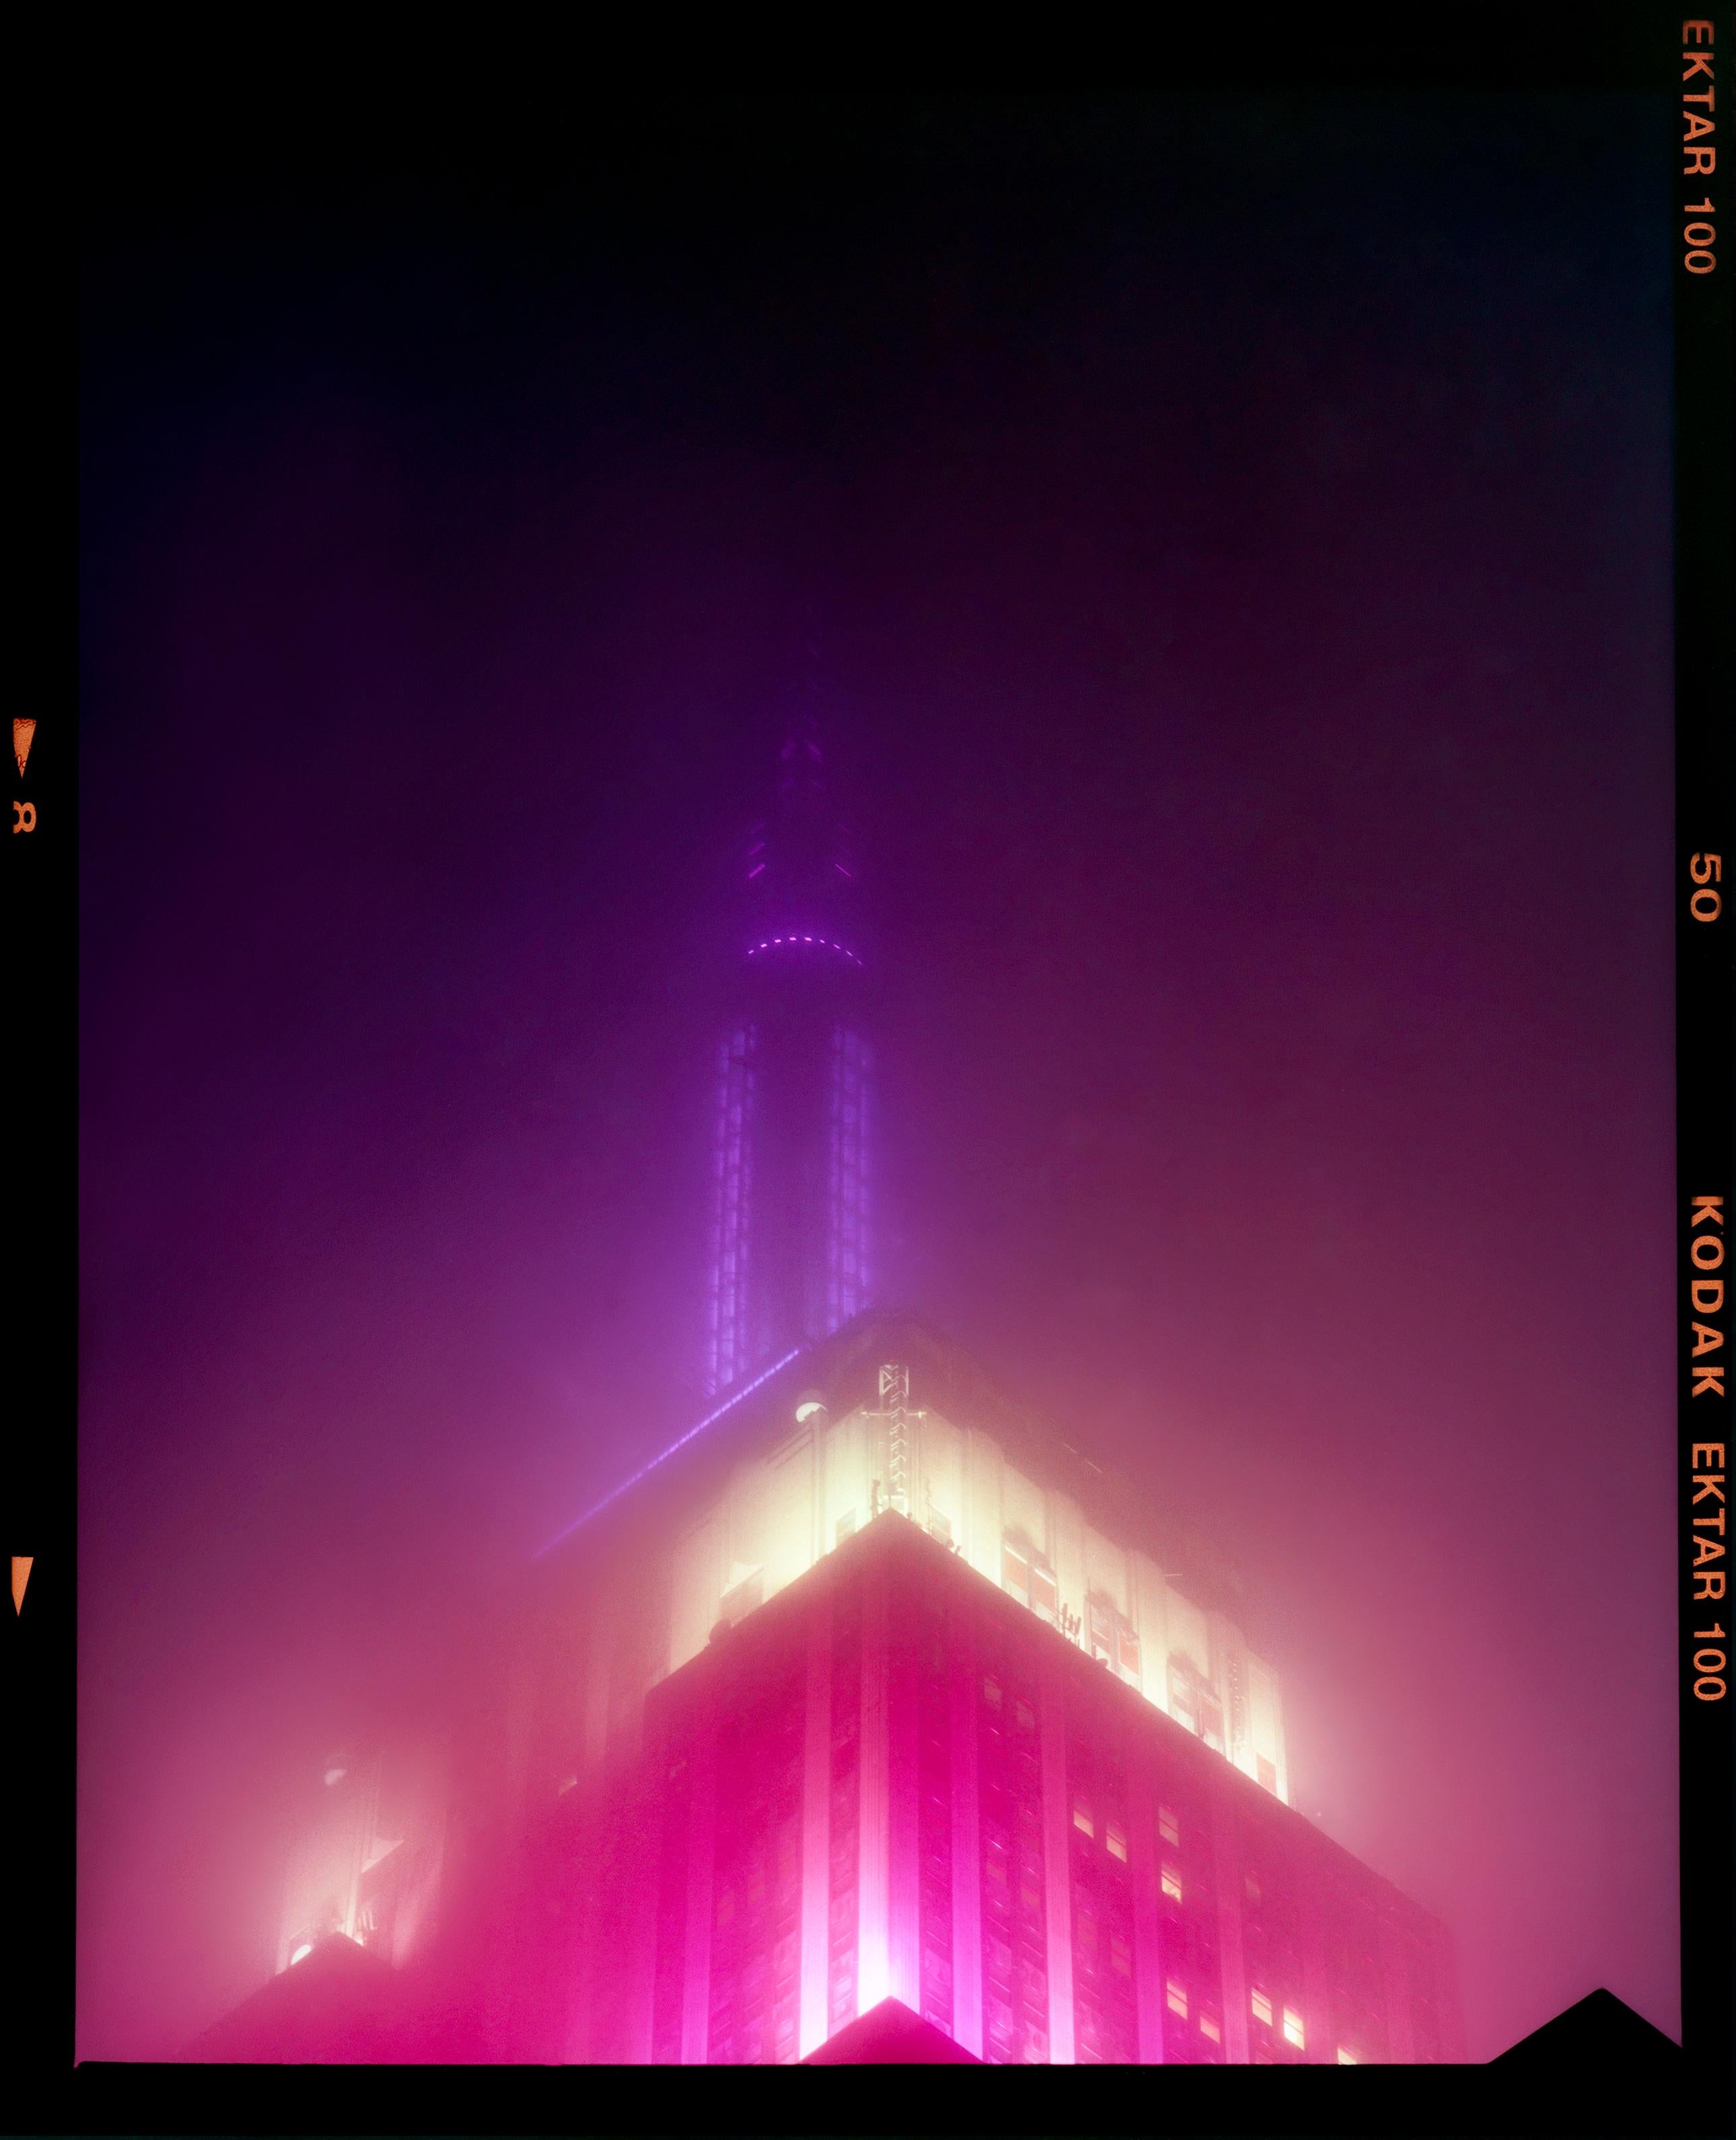 'NOMAD I (Film Rebate)', New York. Richard Heeps has photographed the iconic Empire State building in the mist. The NOMAD sequence of photographs capture the art deco architecture illuminated by changing colours, and is part of Richard's street